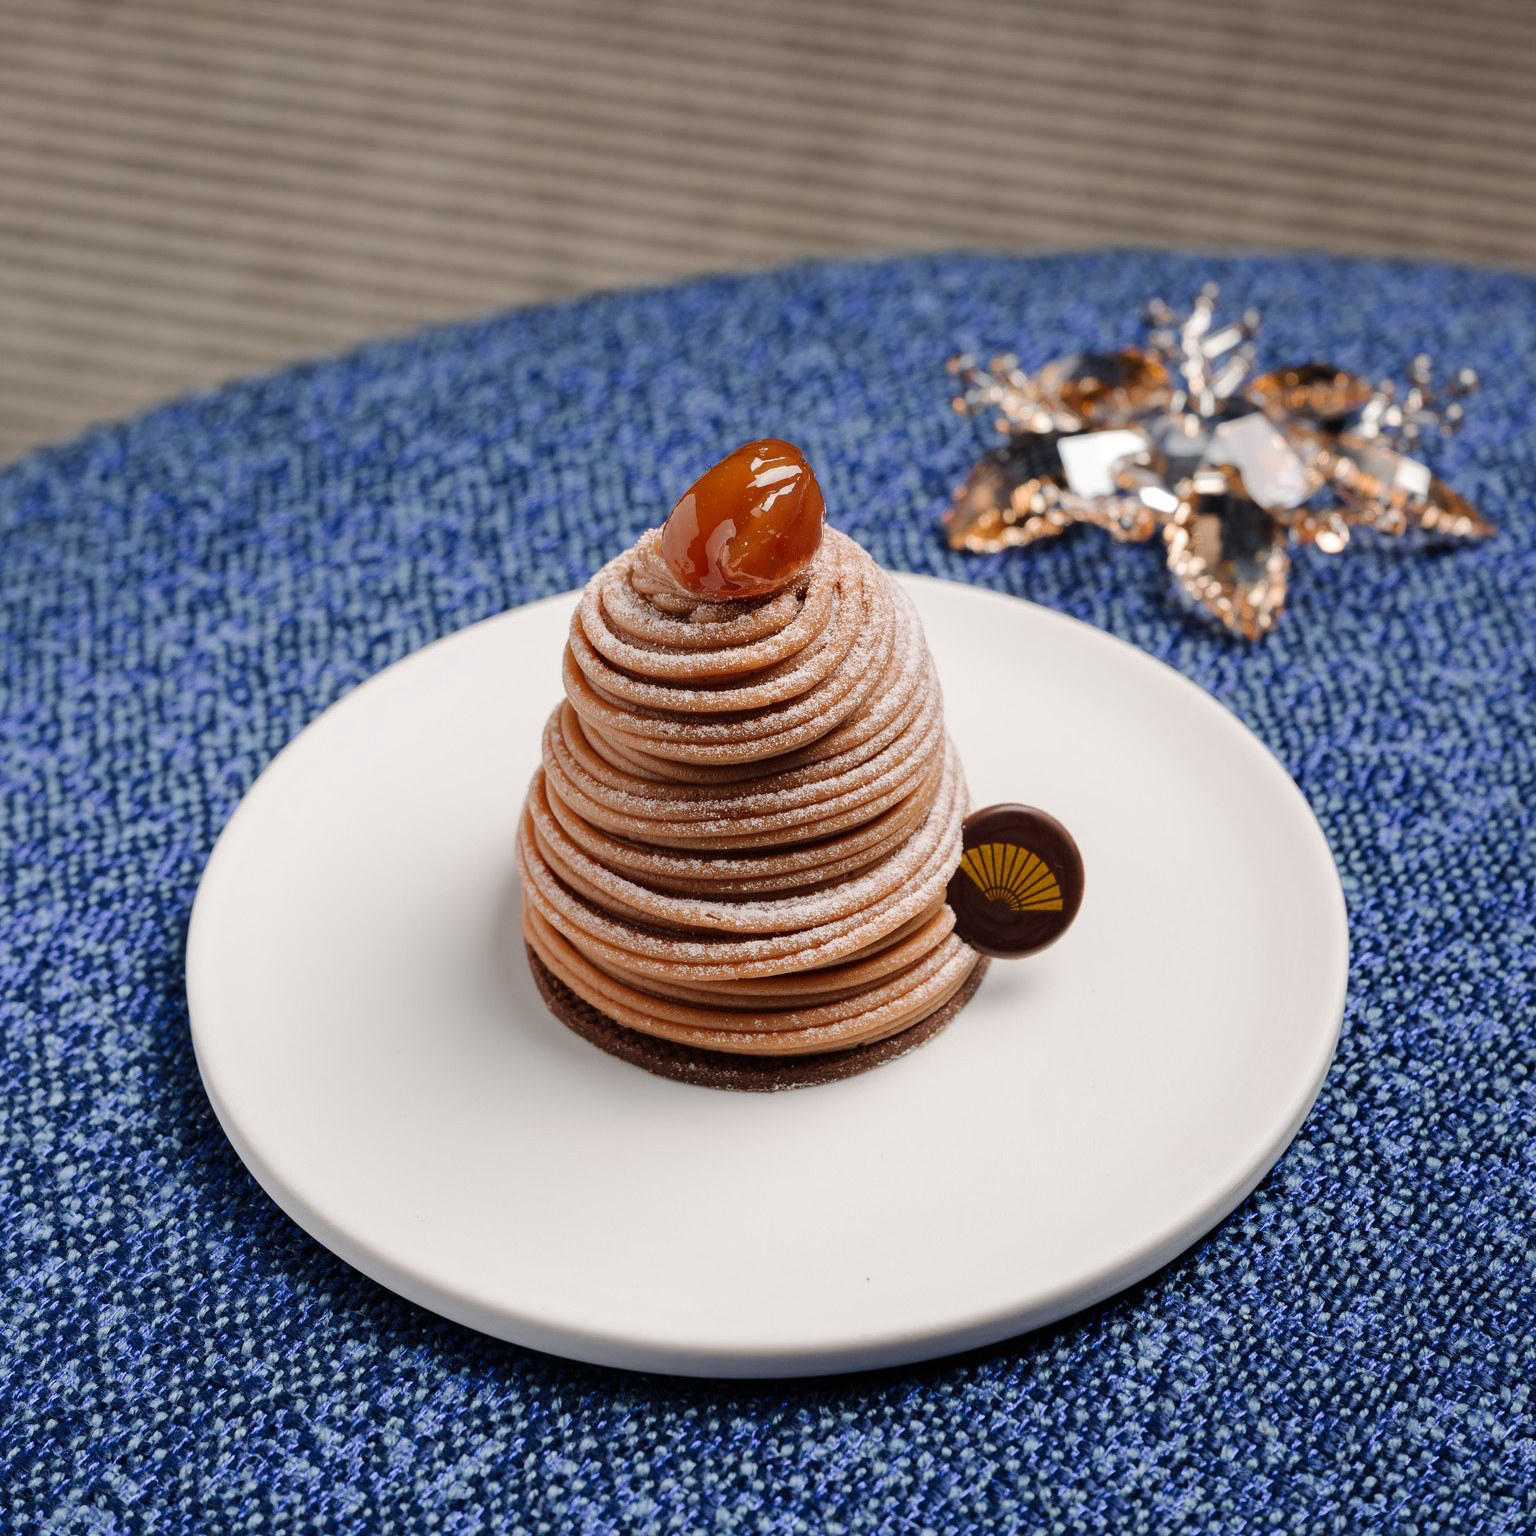 Mandarin Oriental, Milan - Let our Pastry Chef #__marcopinna__ make this holiday season even more jo